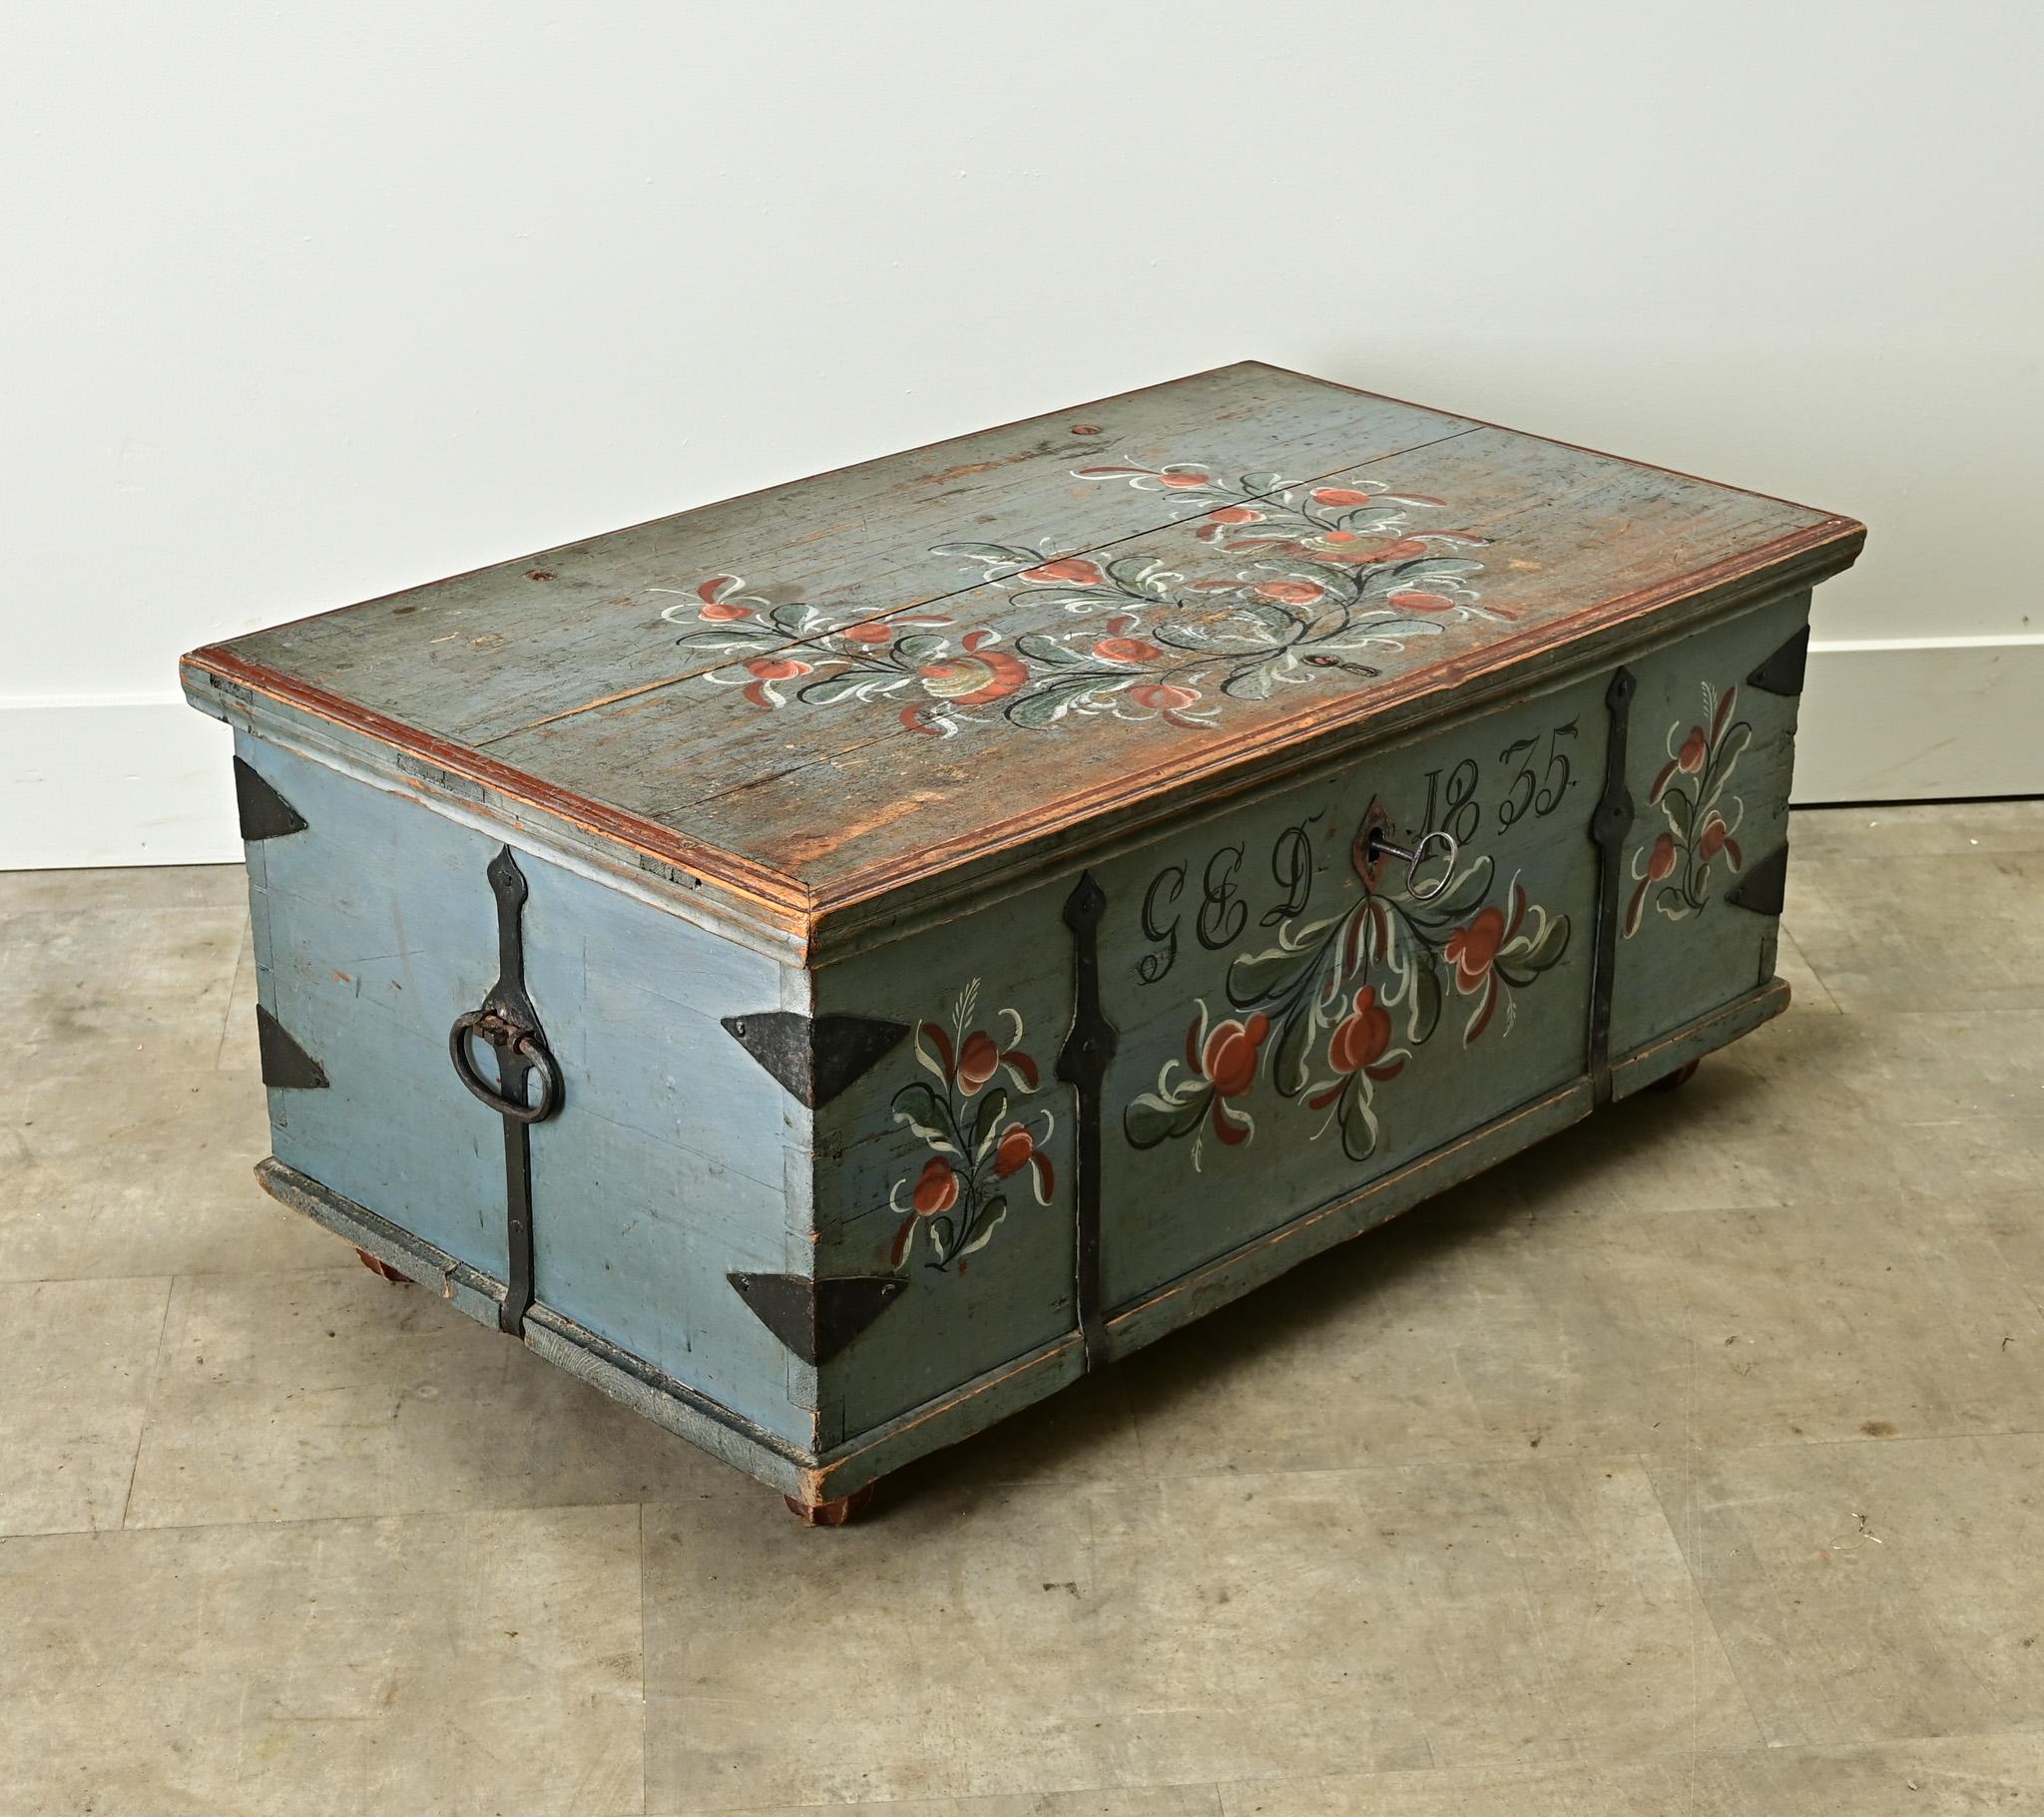 A petite Swedish pine marriage trunk with its original paint. The exterior is painted blue with floral designs and monogrammed G E D 1835. Forged iron bindings enforce the construction of this hardwood trunk with large handles on each end. The top